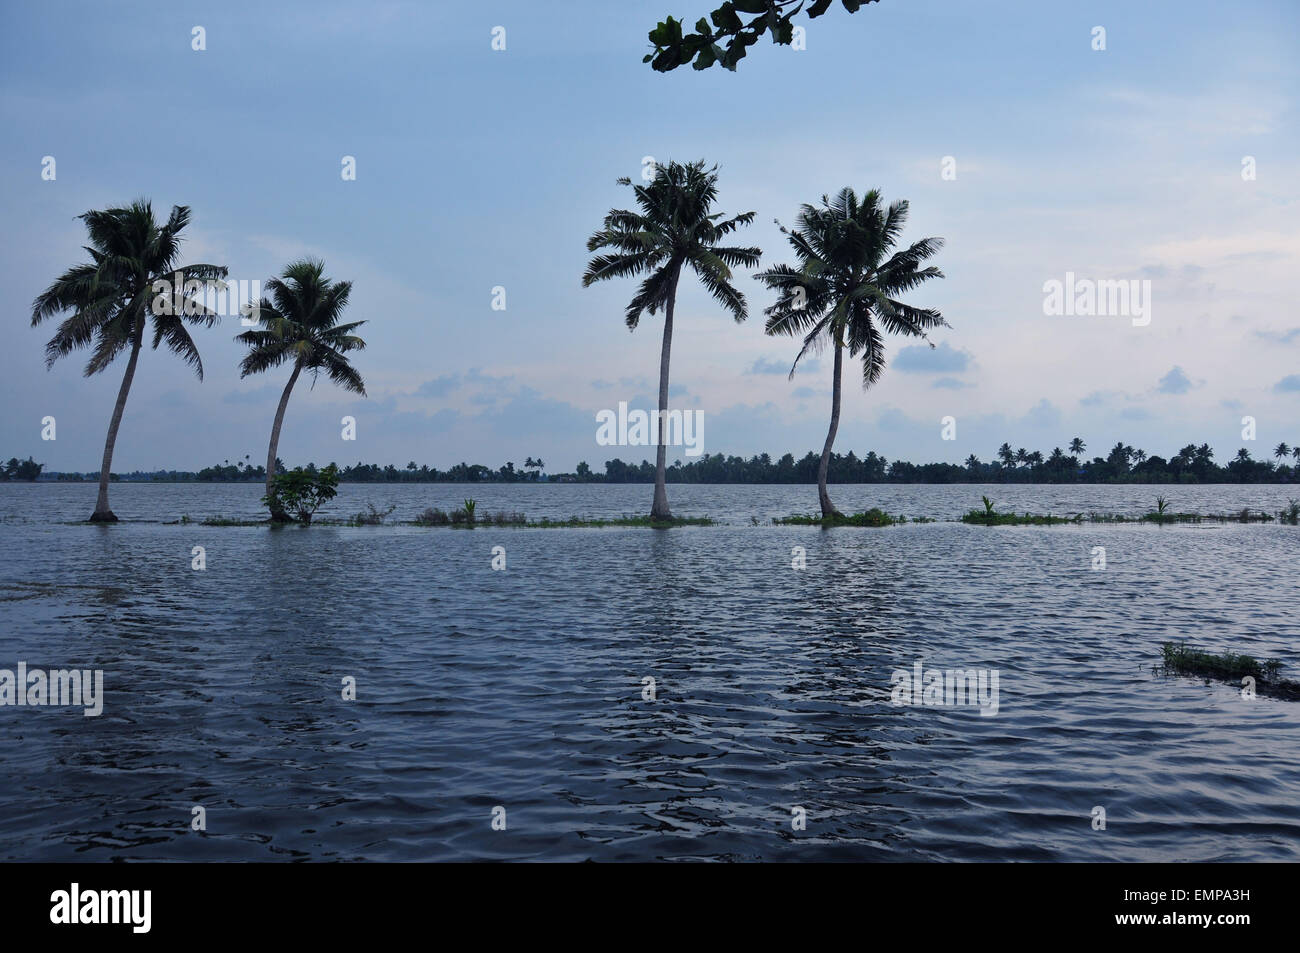 coconut trees and its reflection on water. Stock Photo